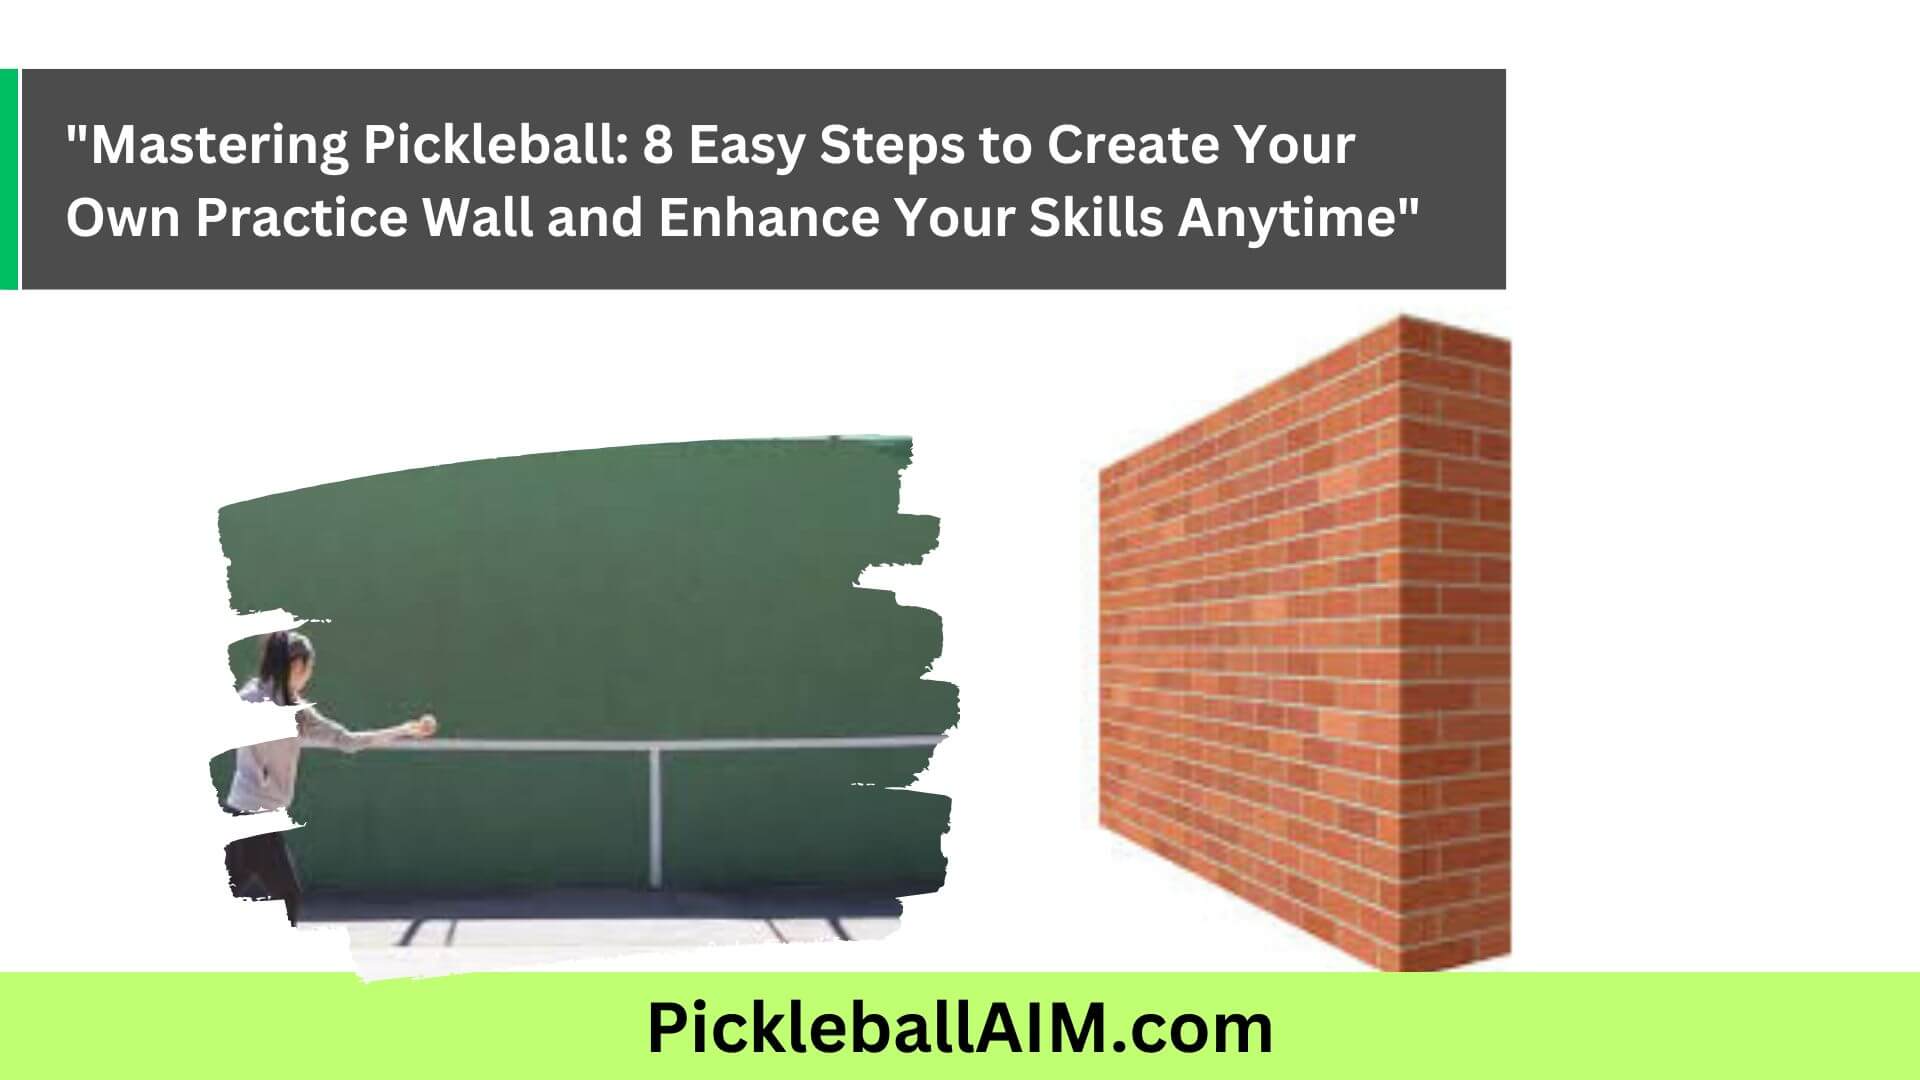 Master Your Pickleball Skills Anytime 8 Easy Steps to Build Your Own Practice Wall